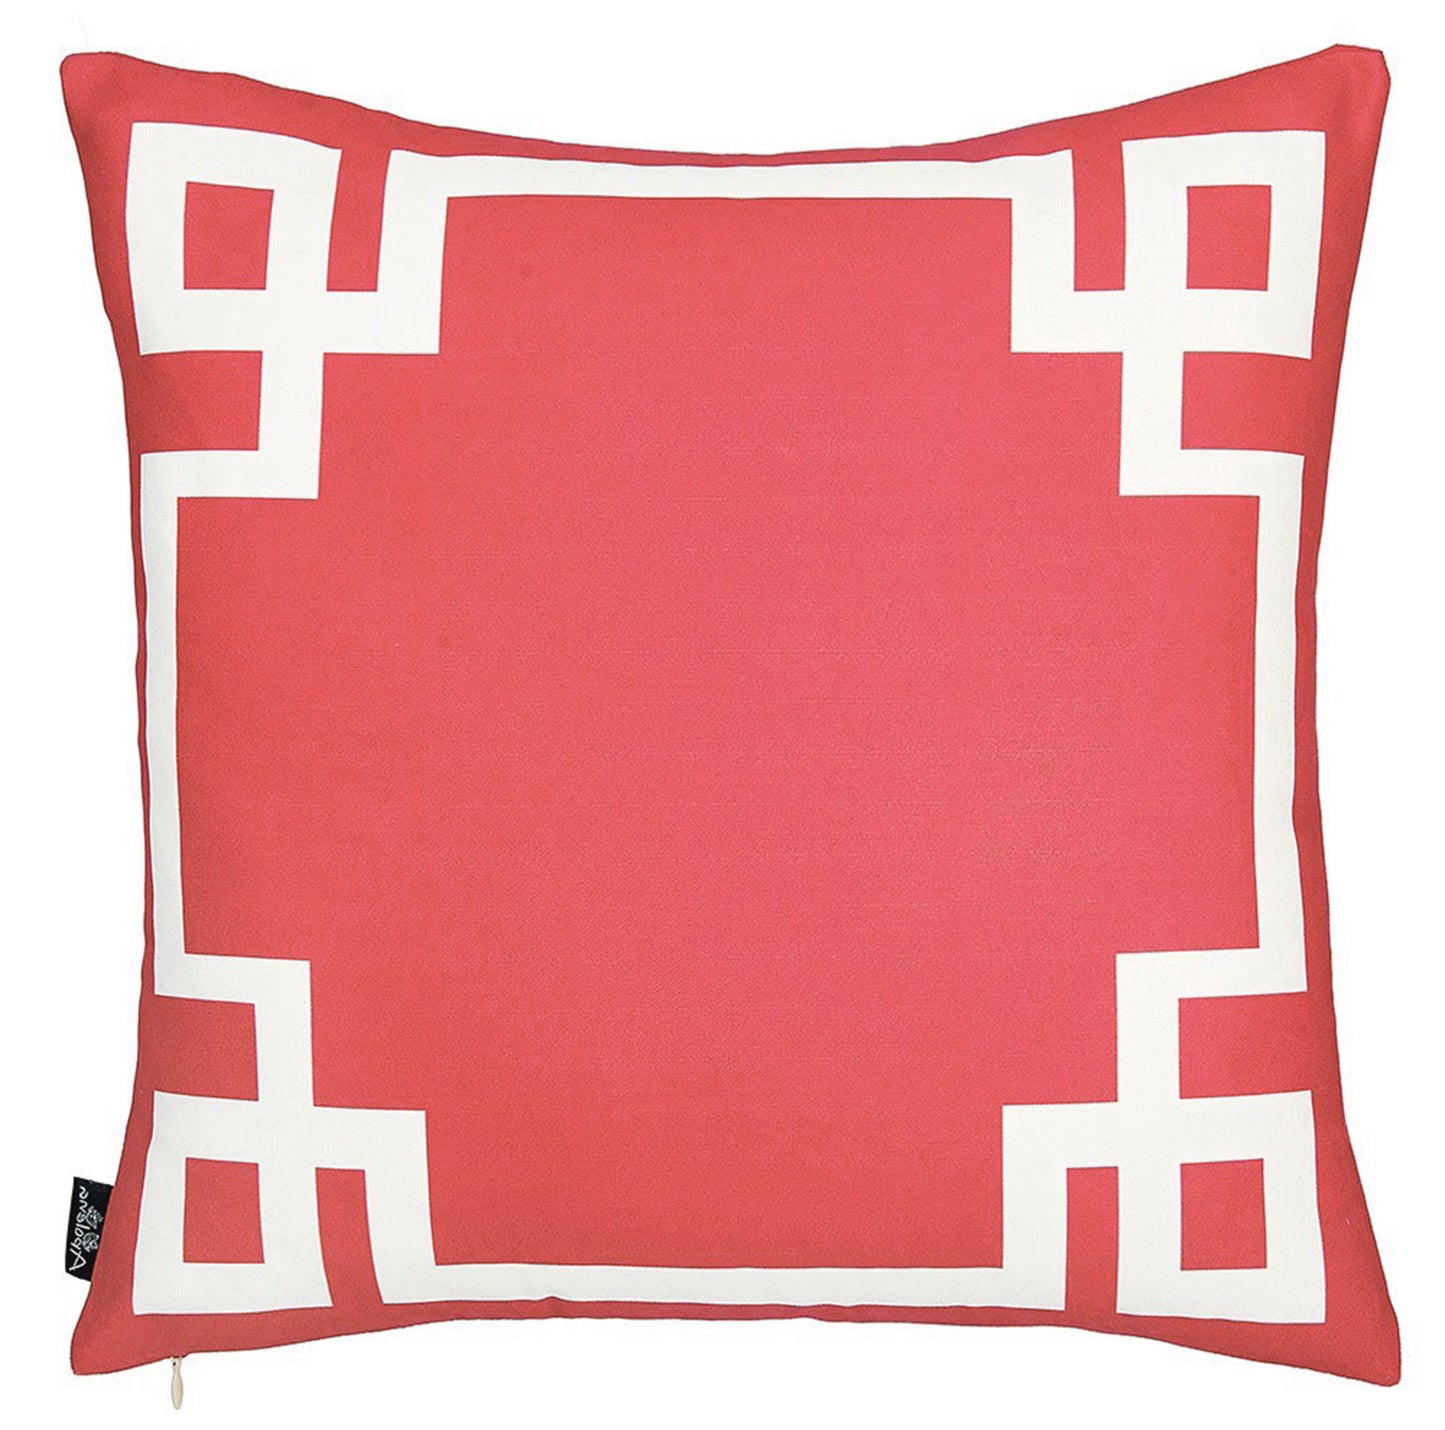 Square Red And White Geometric Decorative Throw Pillow Cover